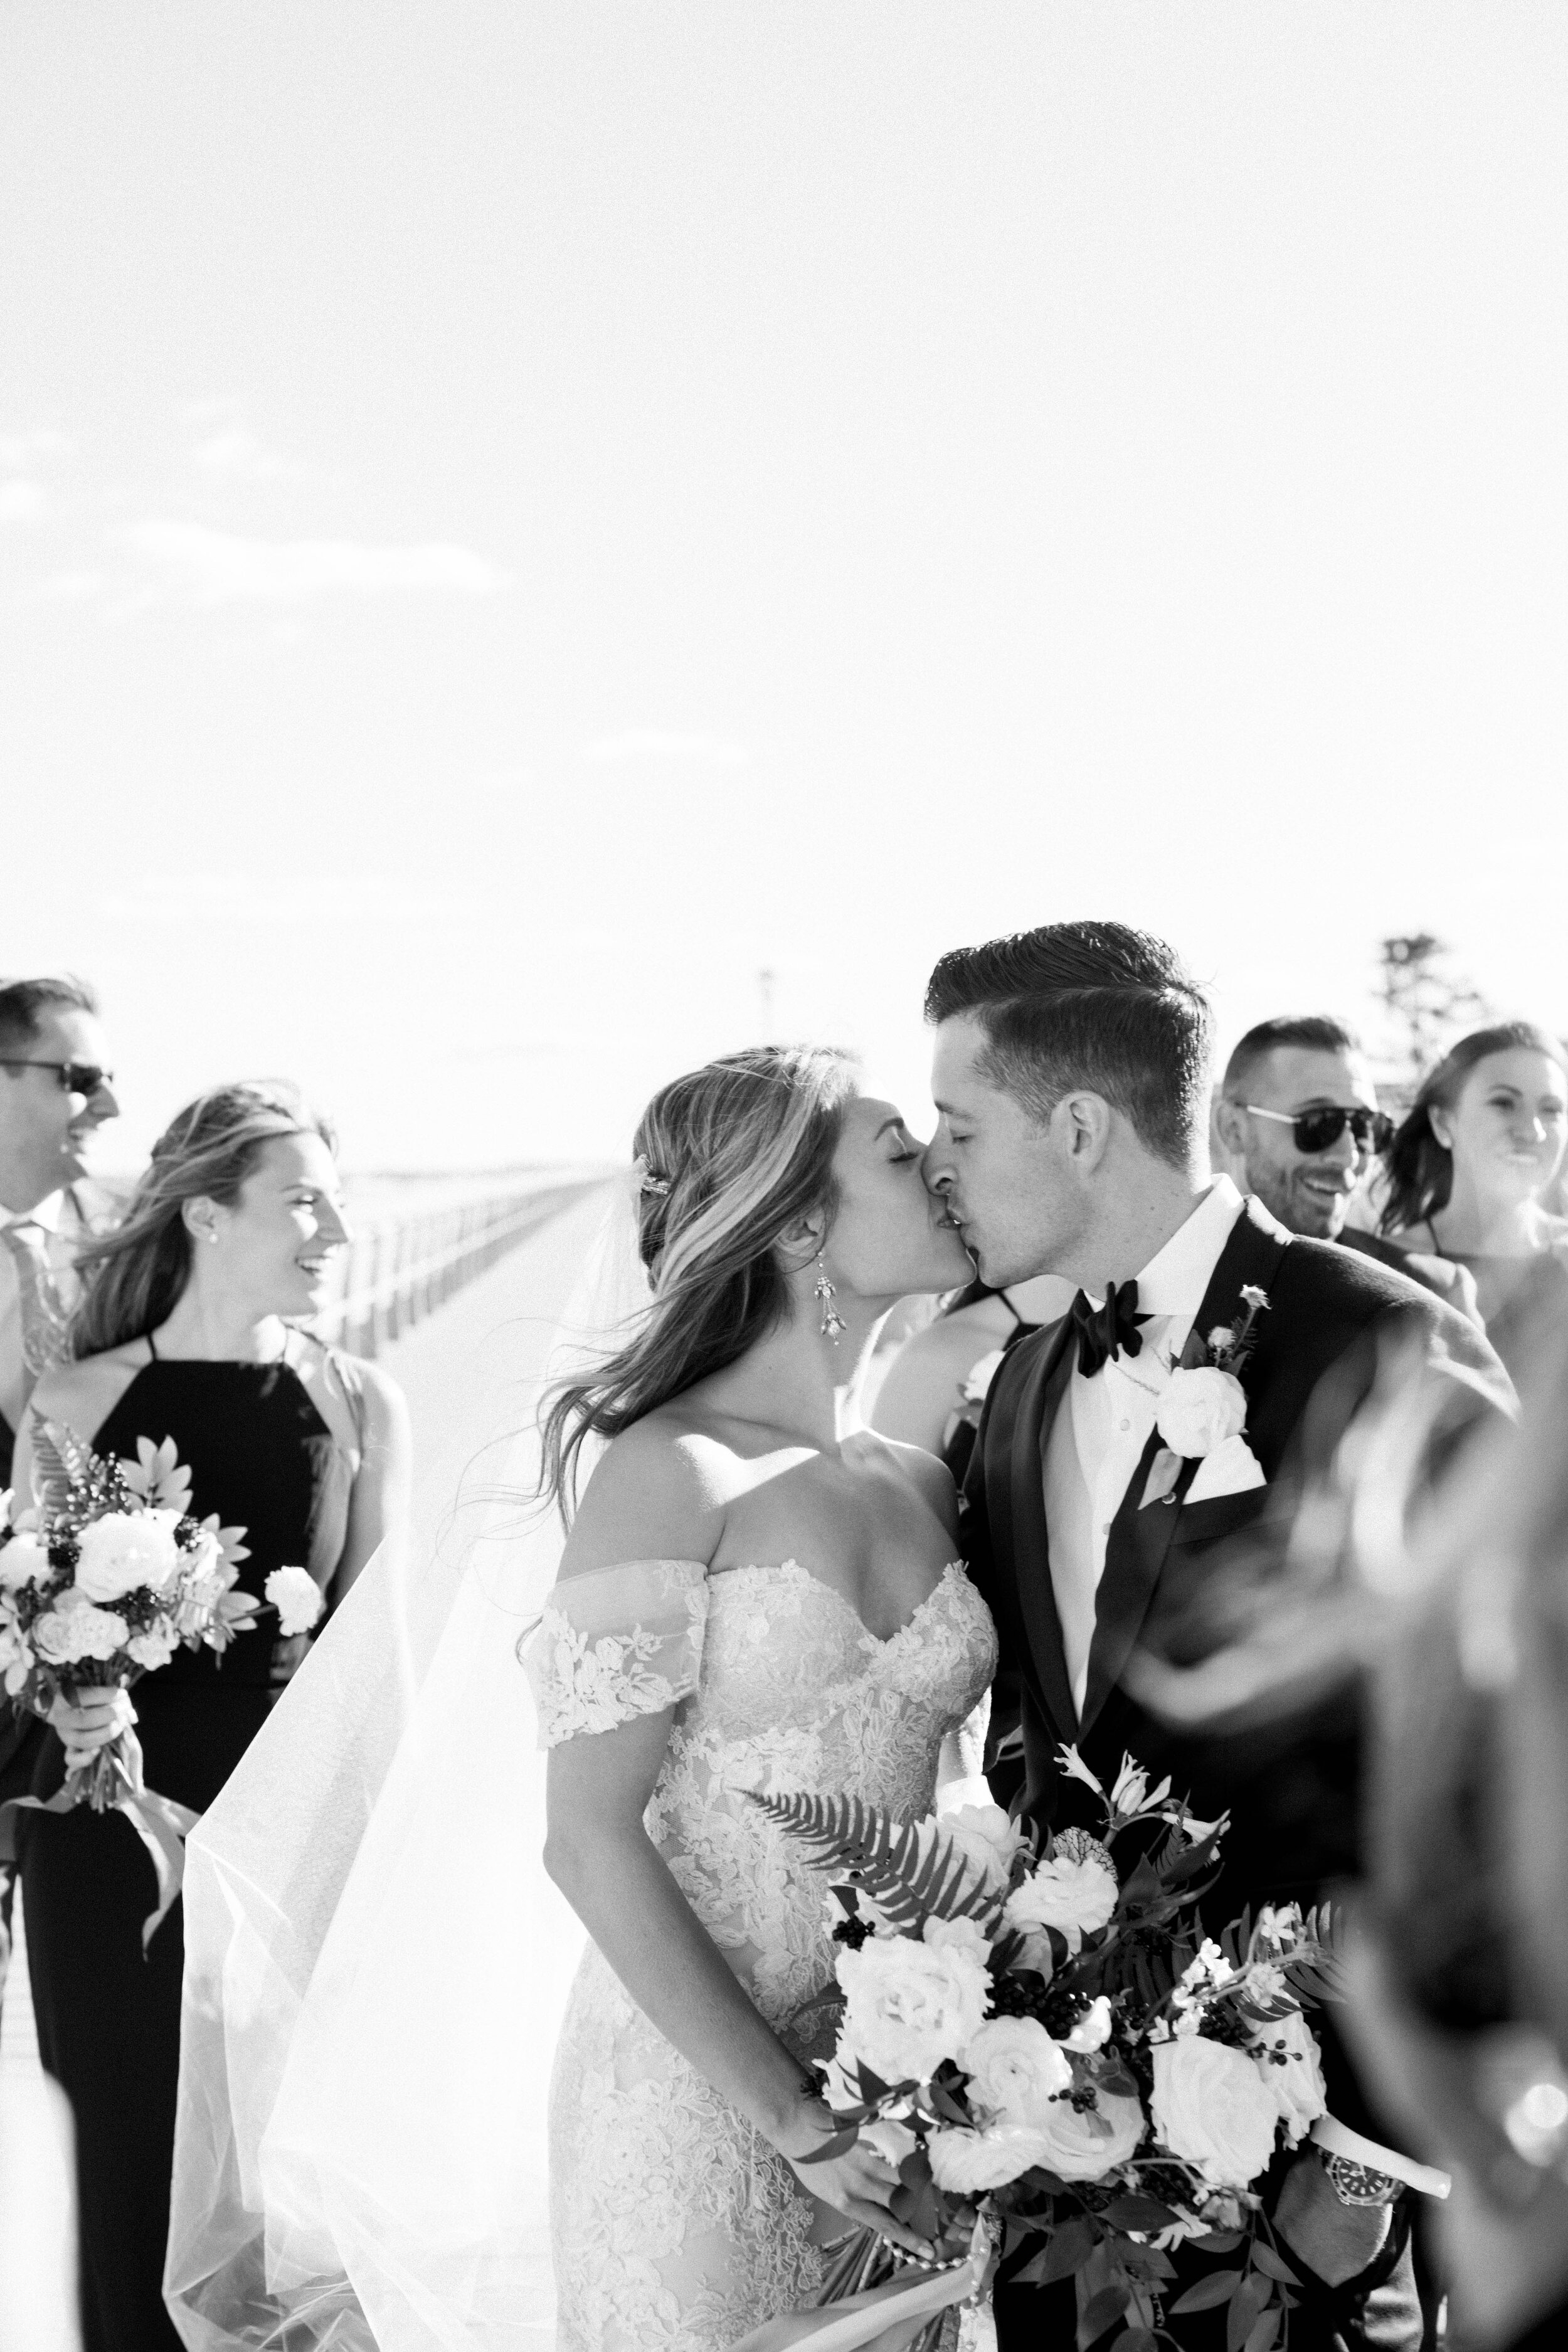 Elegant and glamorous wedding with Monique Lhuillier gown, white organic florals, and sunset portraits at Bay Head Yacht Club in Bay Head, New Jersey by Liz Andolina Photography